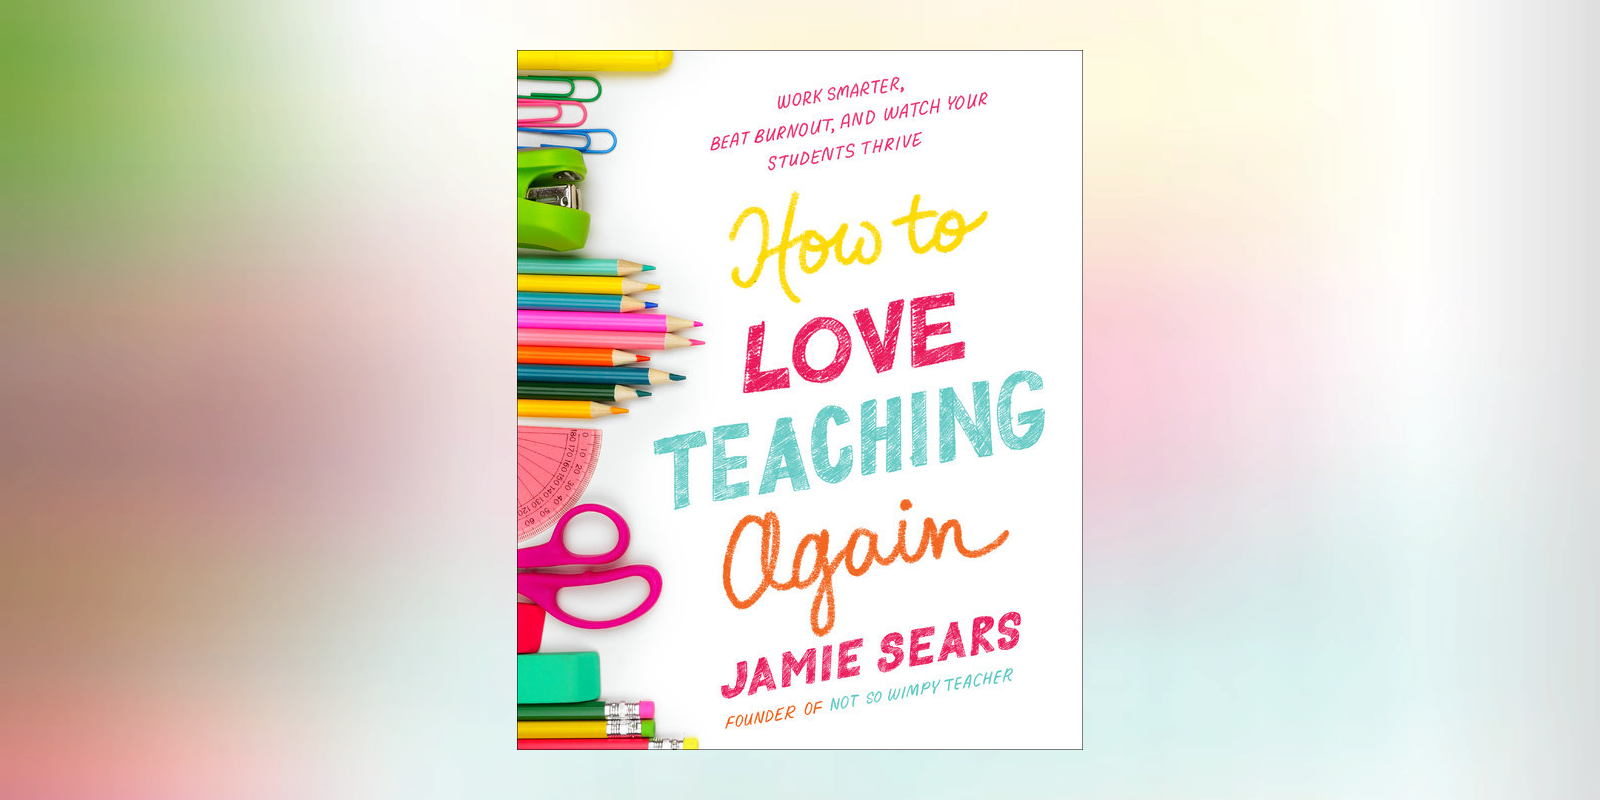 Jamie Sears addresses the current obstacles that teachers face in <i>How to Love Teaching Again</i>